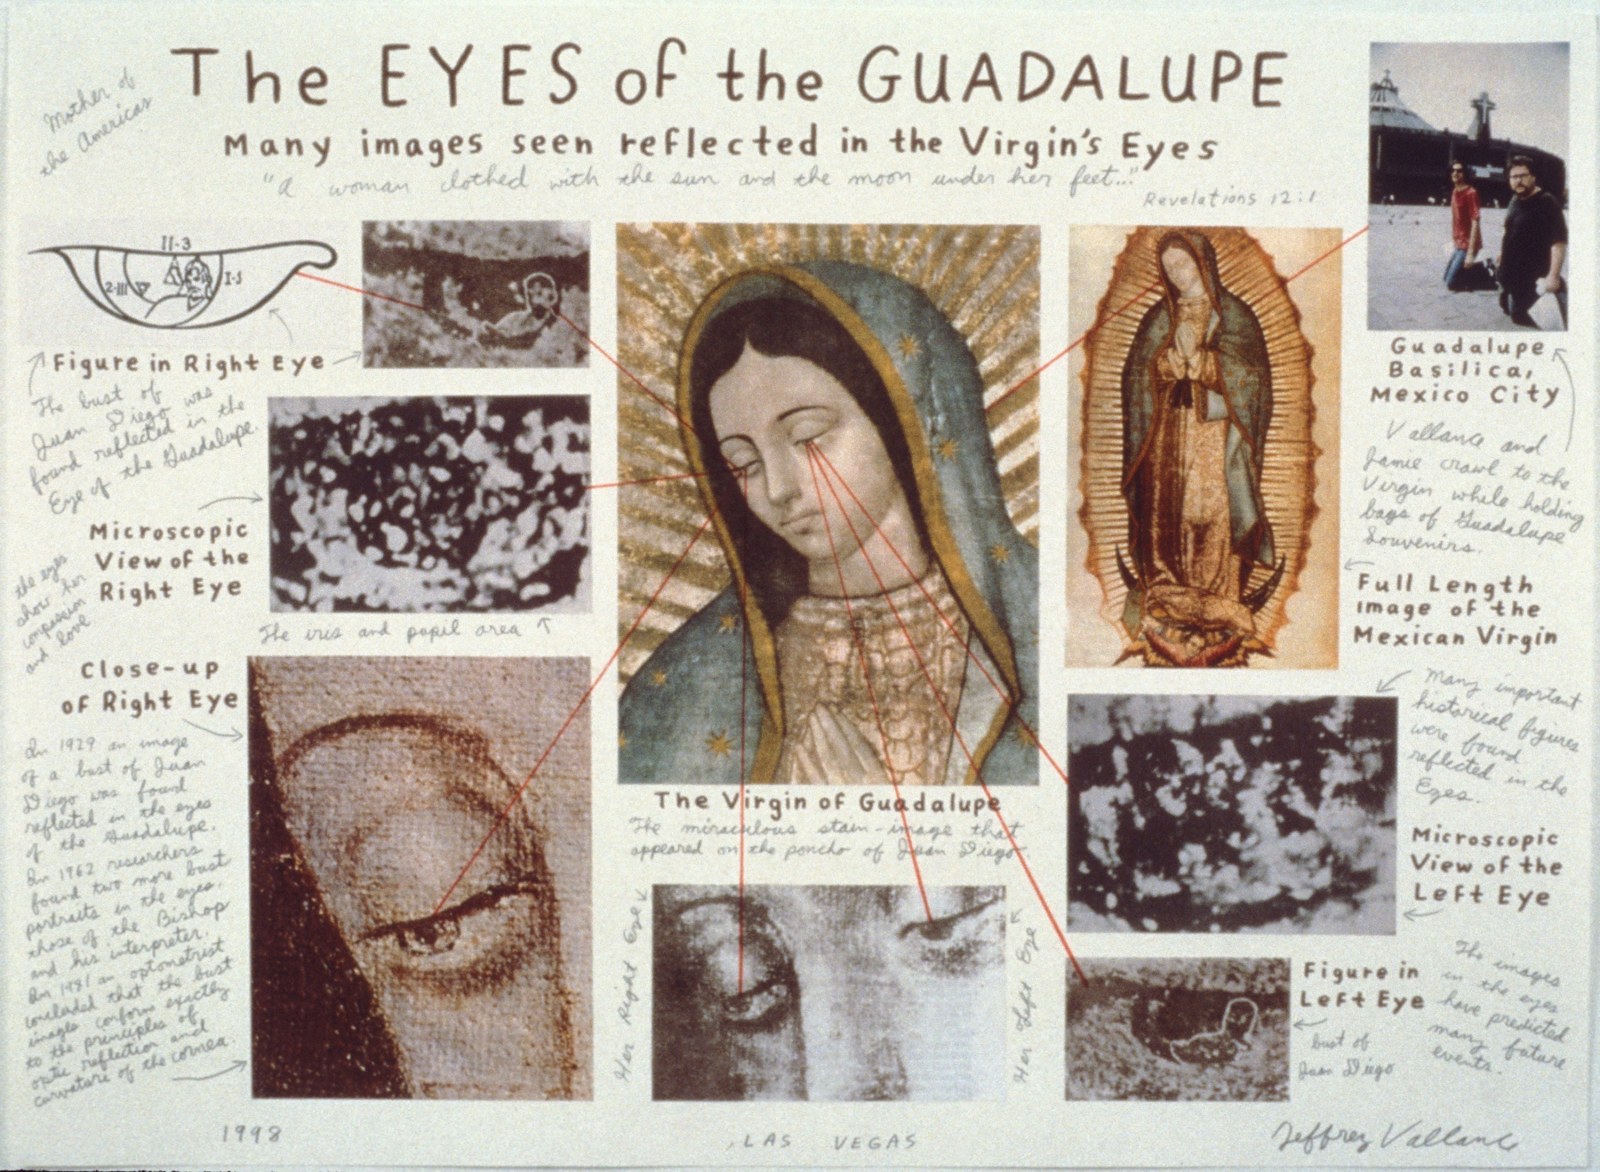 JEFFREY VALLANCE, The Eyes of the Guadalupe